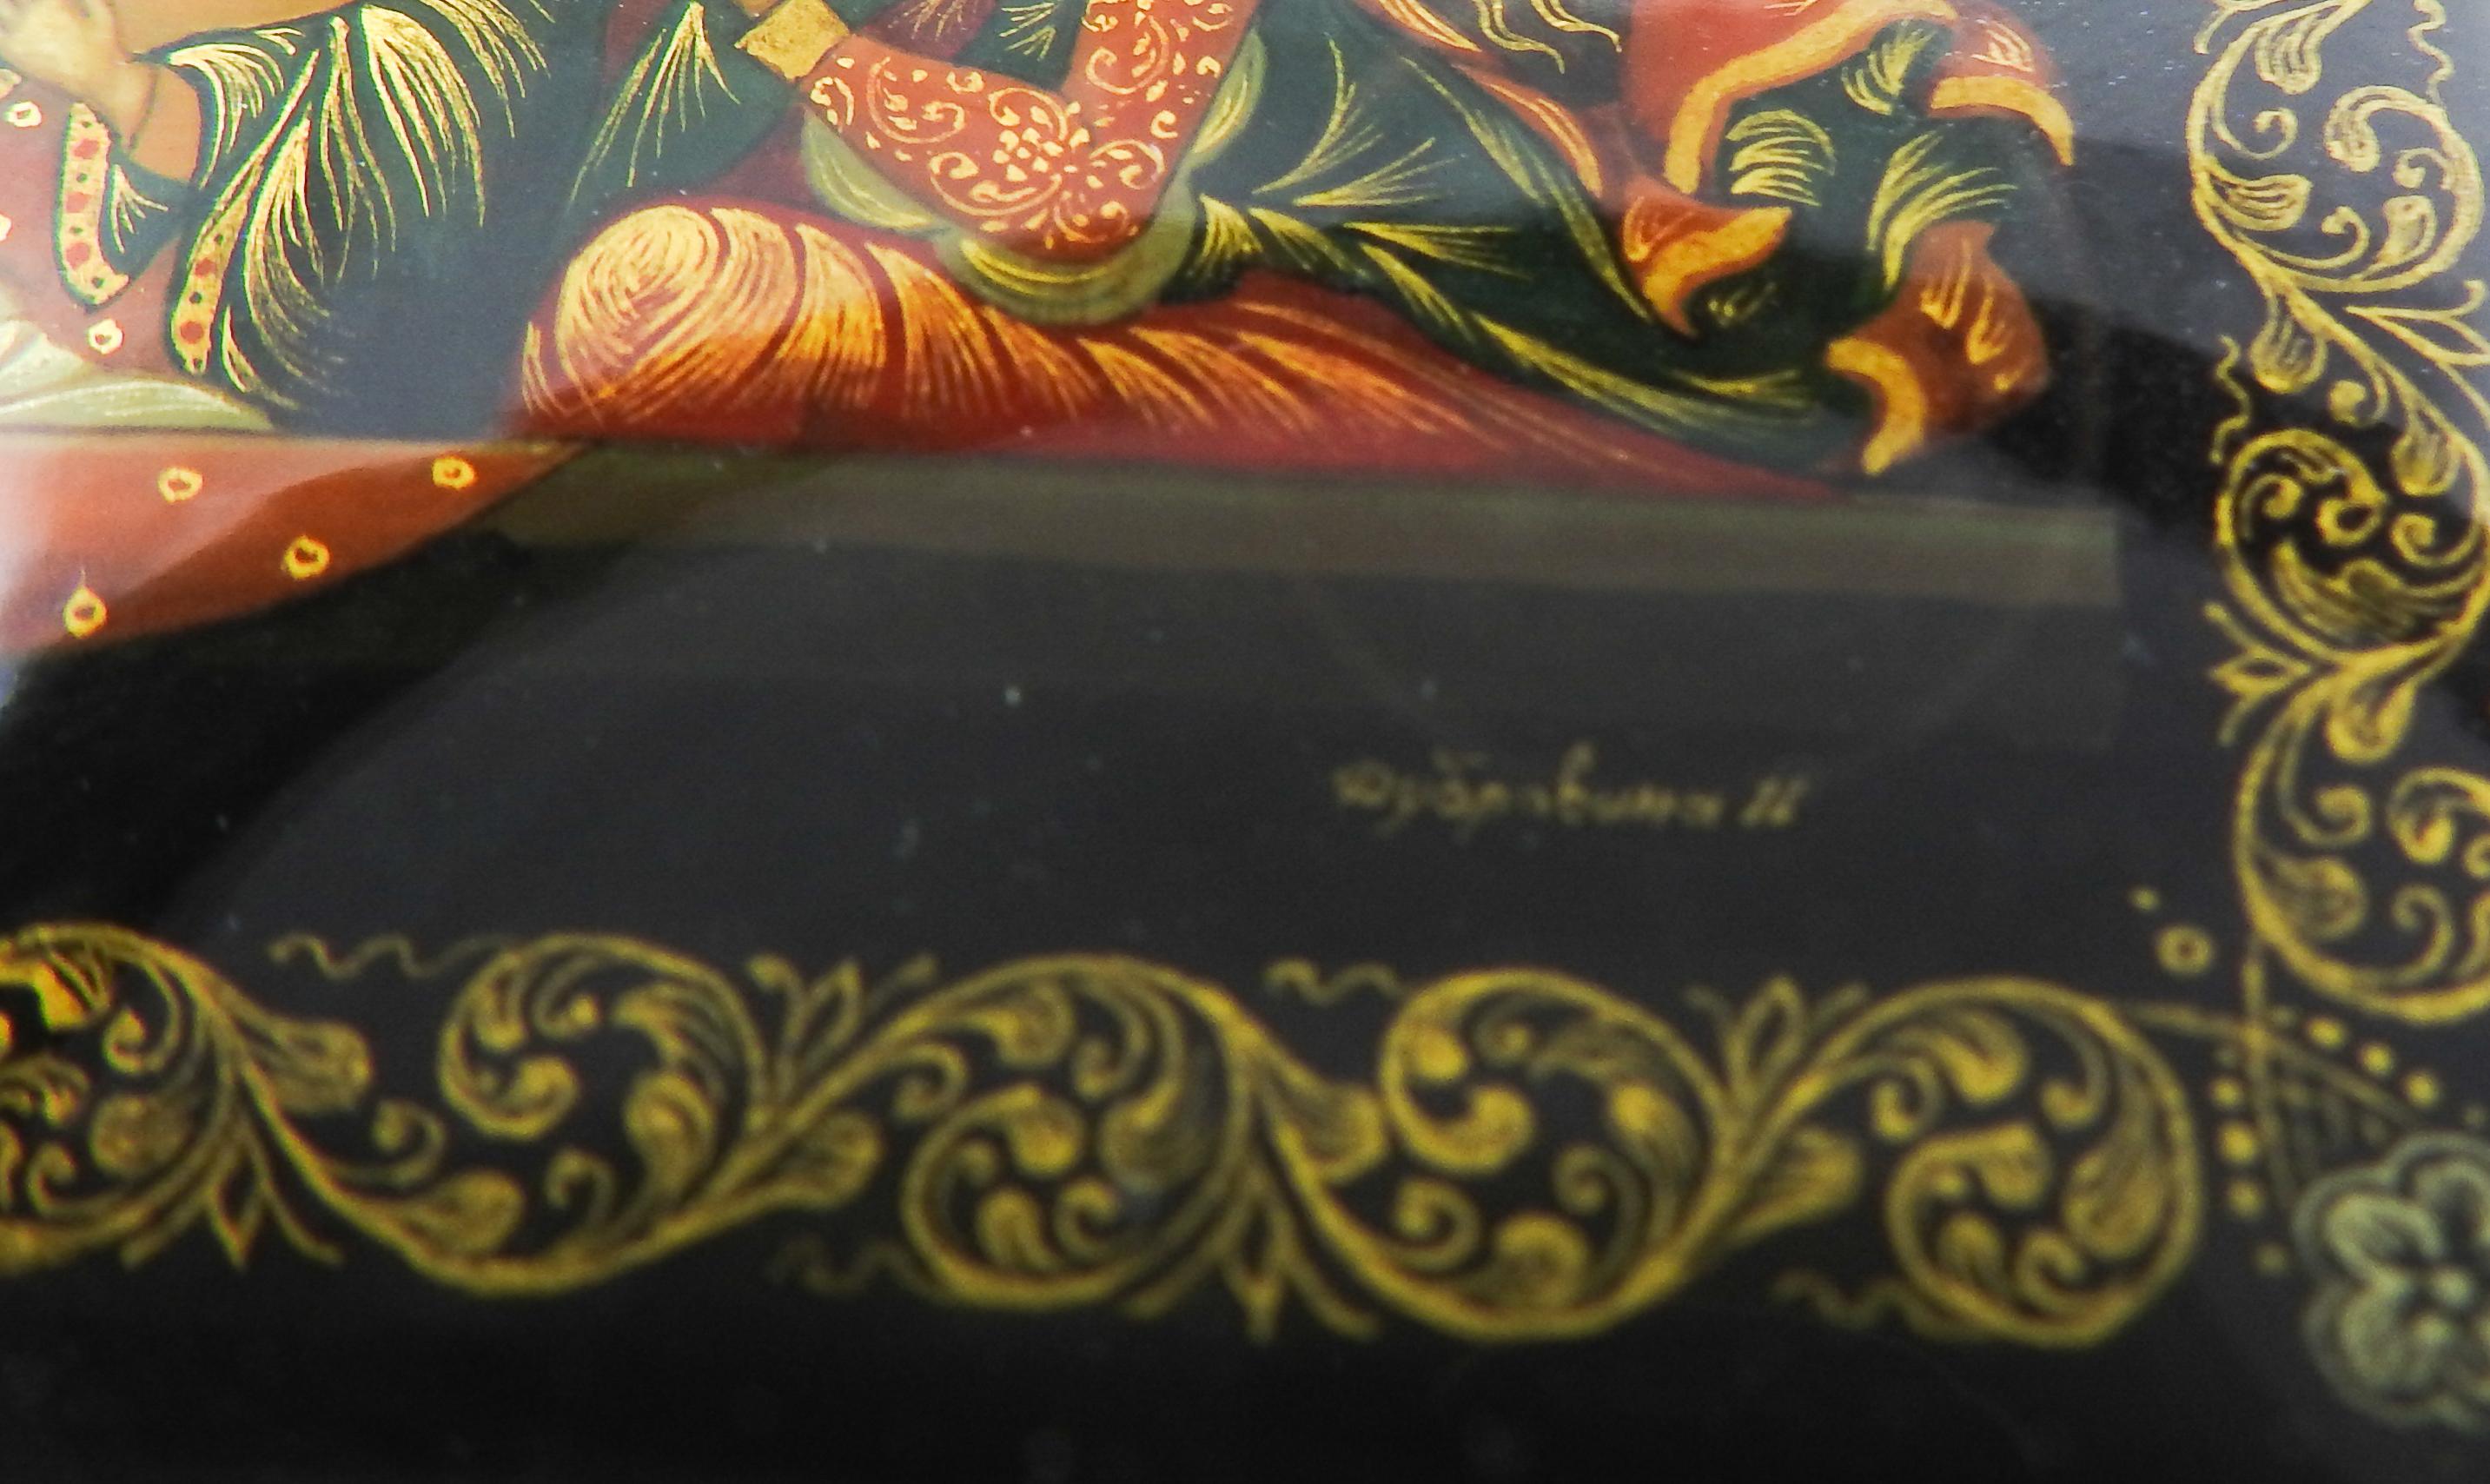 Offering this gorgeous hand painted Russian lacquer box. It is titled 